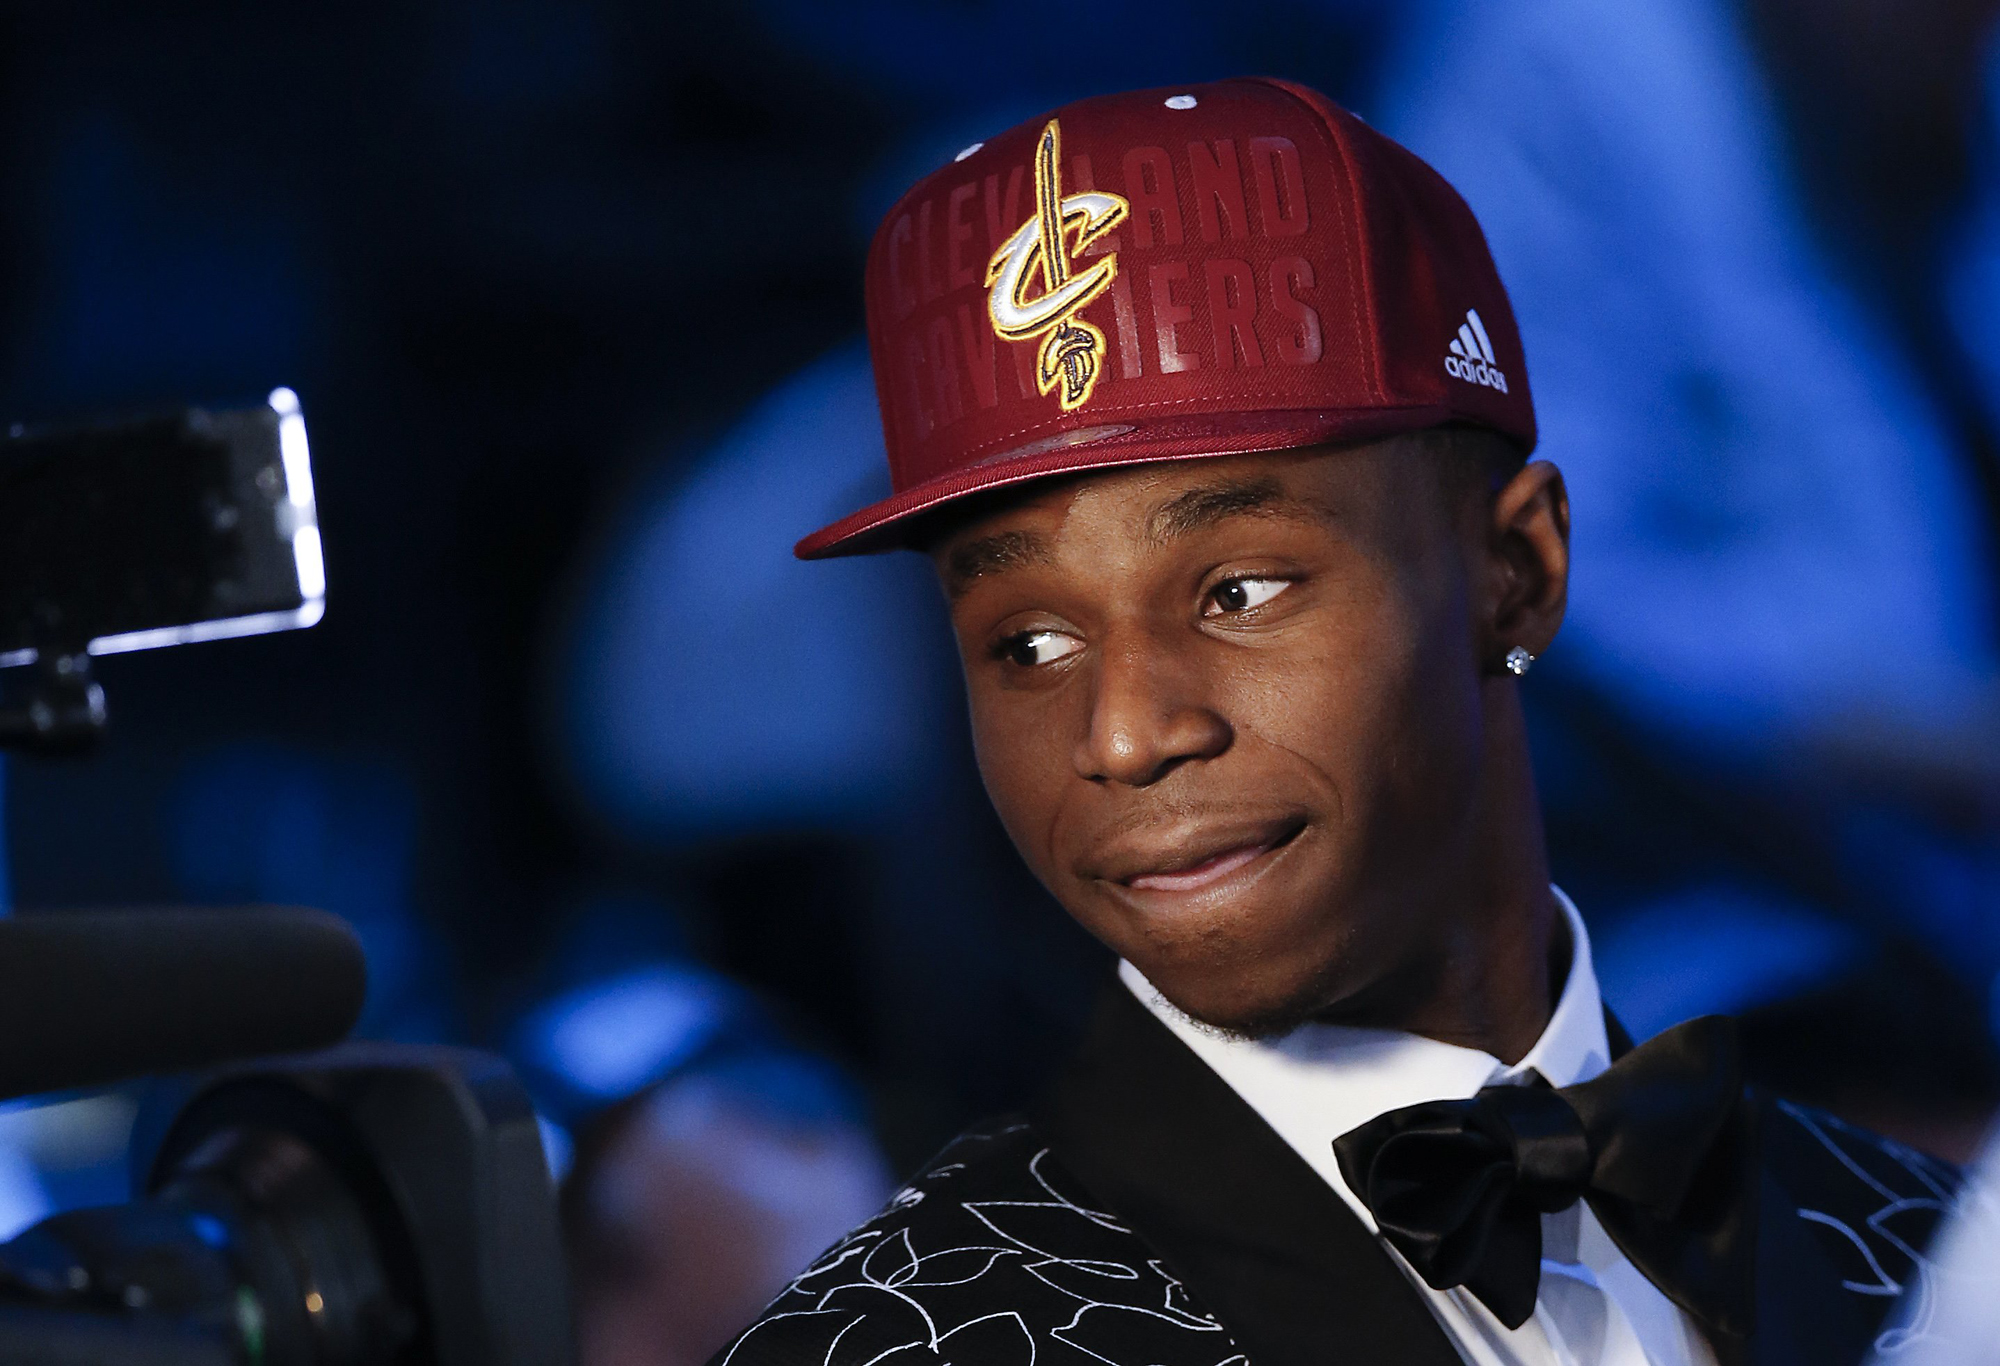 Andrew Wiggins of Kansas stops for a television interview after being selected by the Cleveland Cavaliers as the number one pick in the 2014 NBA draft, June 26, in New York.